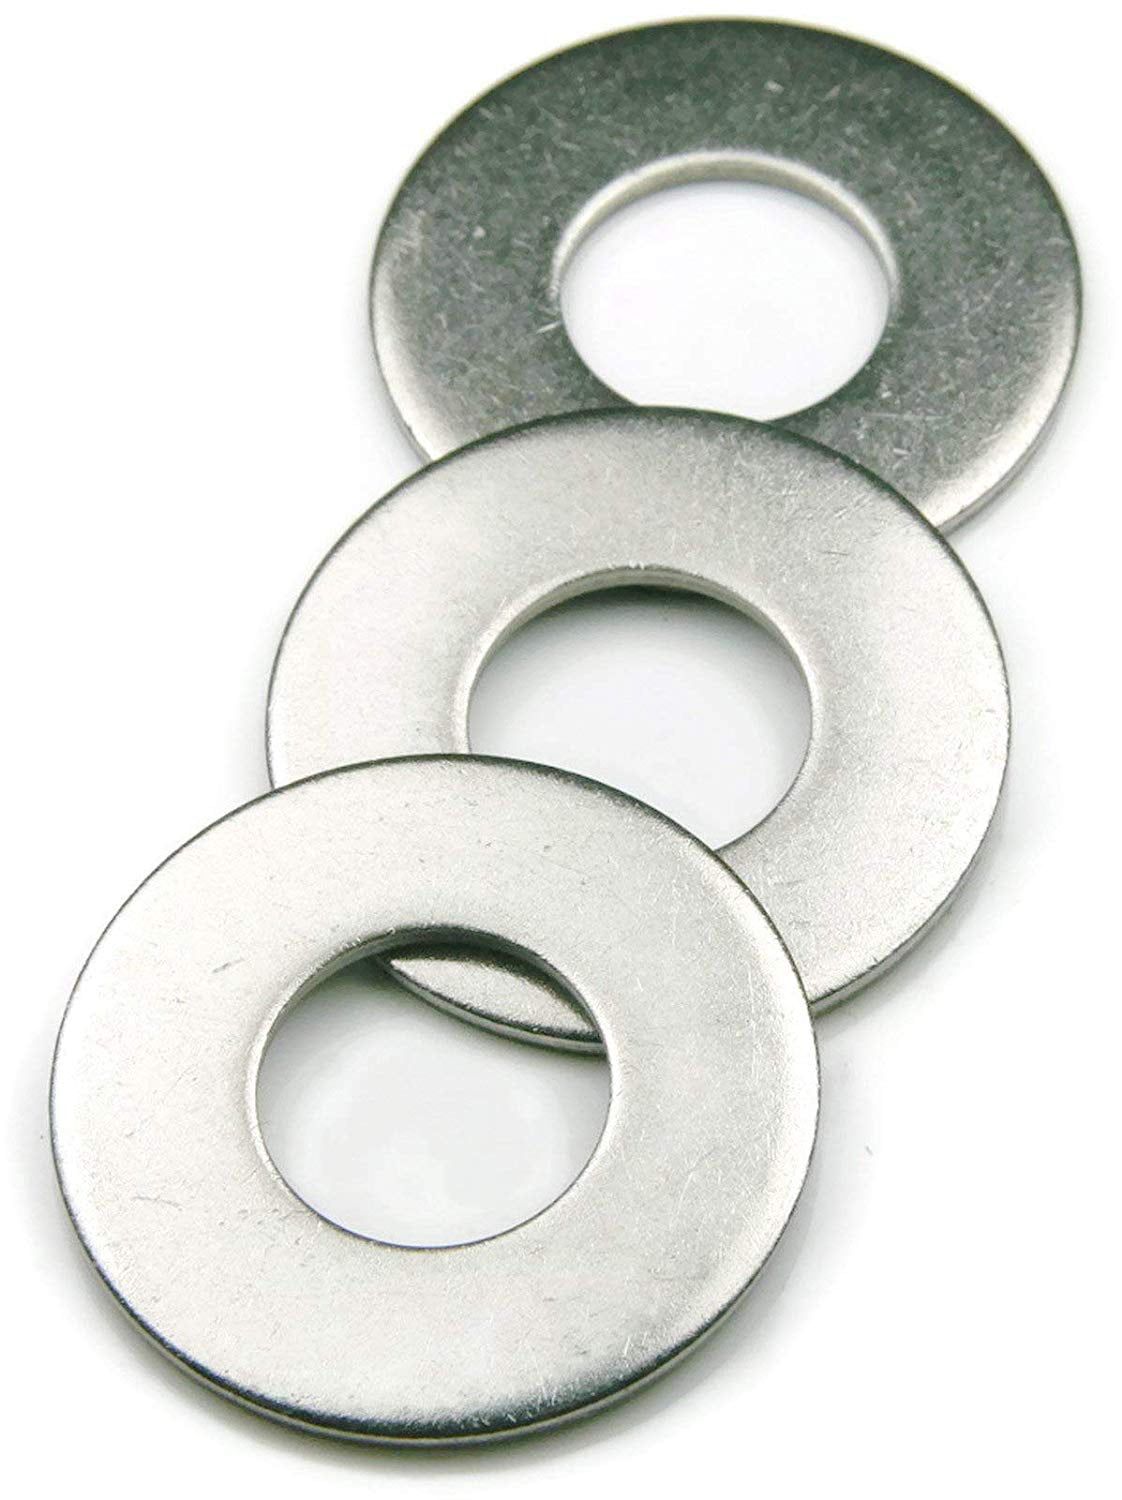 50 Qty #8 x 3/4" 304 Stainless Steel Fender Washers BCP561 